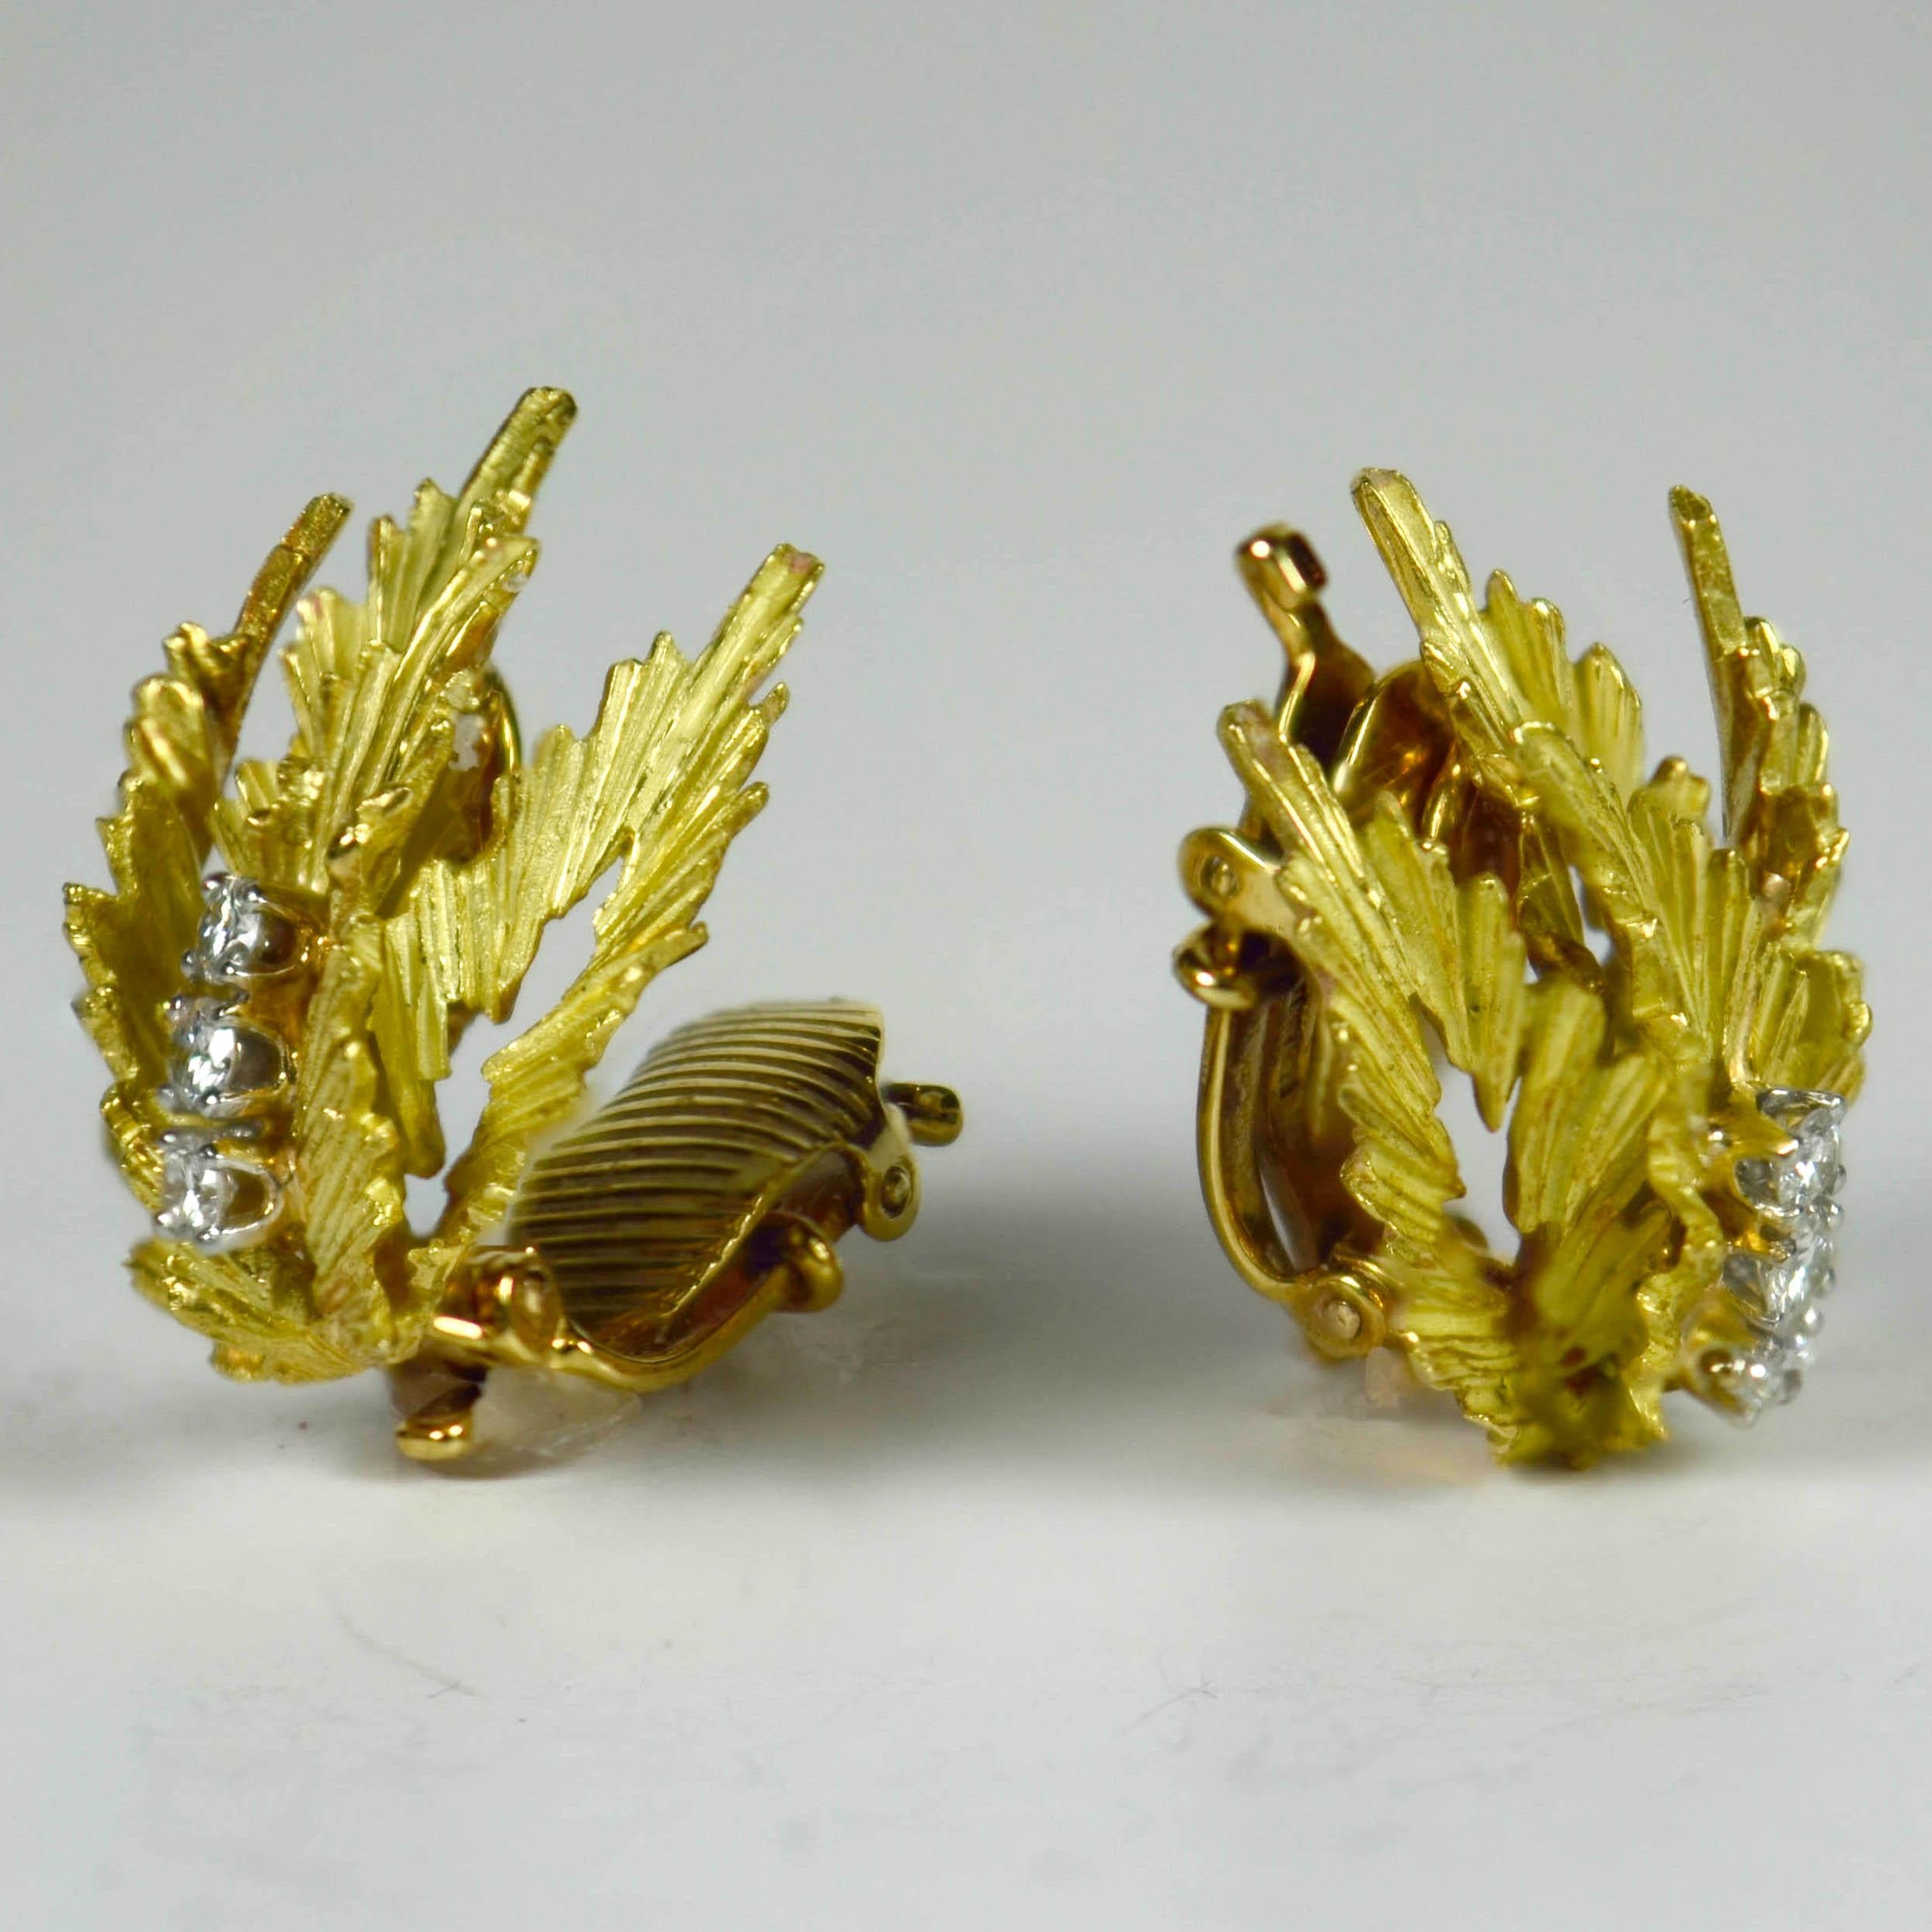 A pair of 18 karat gold clip on earrings designed as a spray of yellow gold leaves,  the central leaf set with a line of three round brilliant cut white diamonds.

Marked 18KT, and patent mark PAT 2423905 for the adjustable tension earclips. Unknown